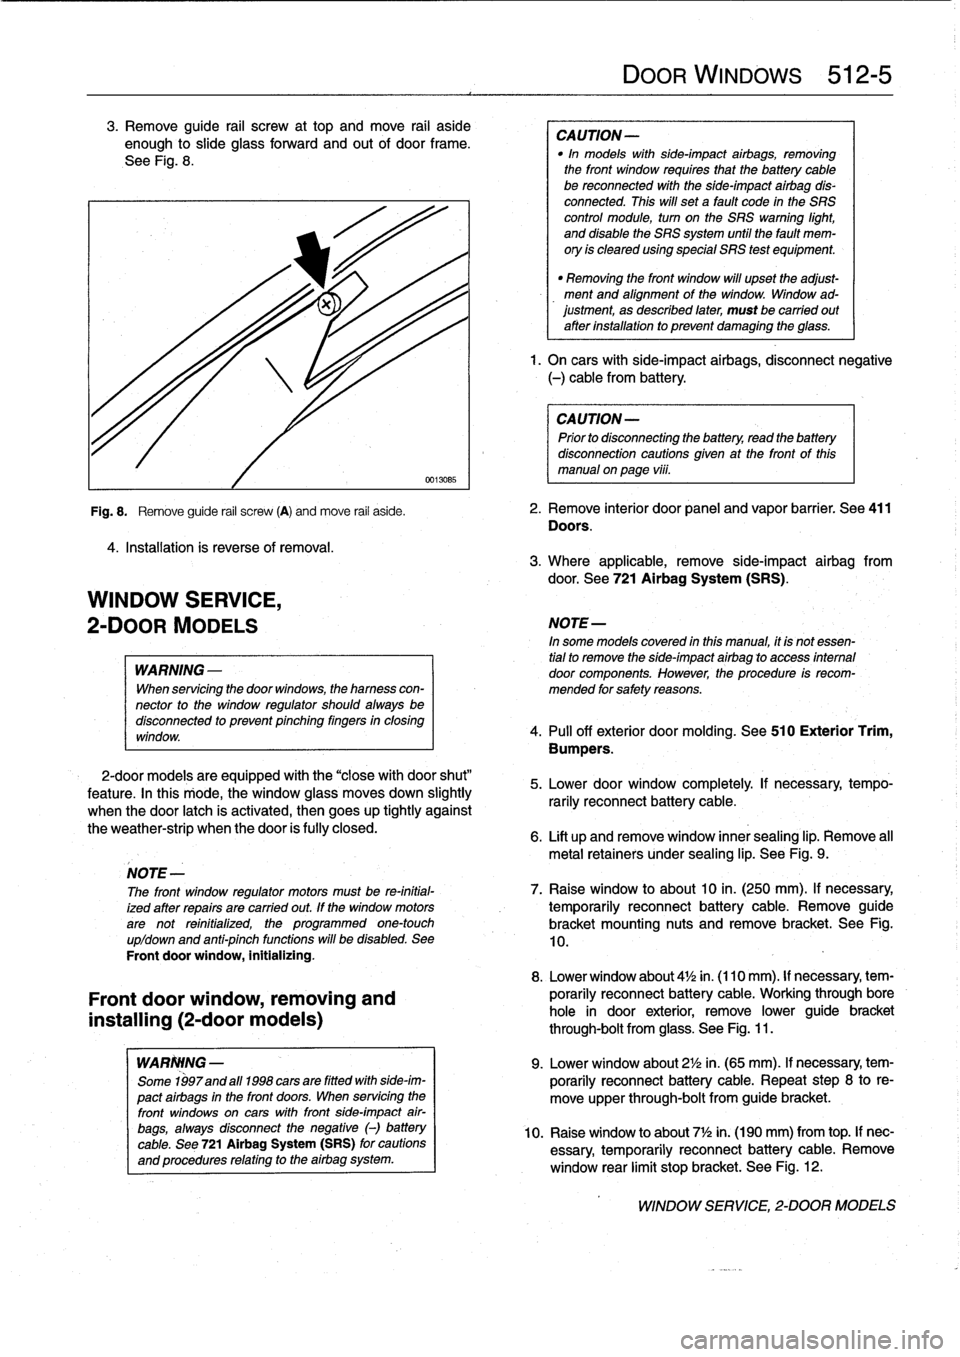 BMW 323i 1993 E36 Workshop Manual 
3
.
Remove
guide
rail
screw
at
top
and
move
rail
aside
enough
to
slide
glass
forward
and
out
of
door
frame
.

See
Fig
.
8
.

4
.
Installation
is
reverse
of
removal
.

WINDOW
SERVICE,

2-DOOR
MODELS

